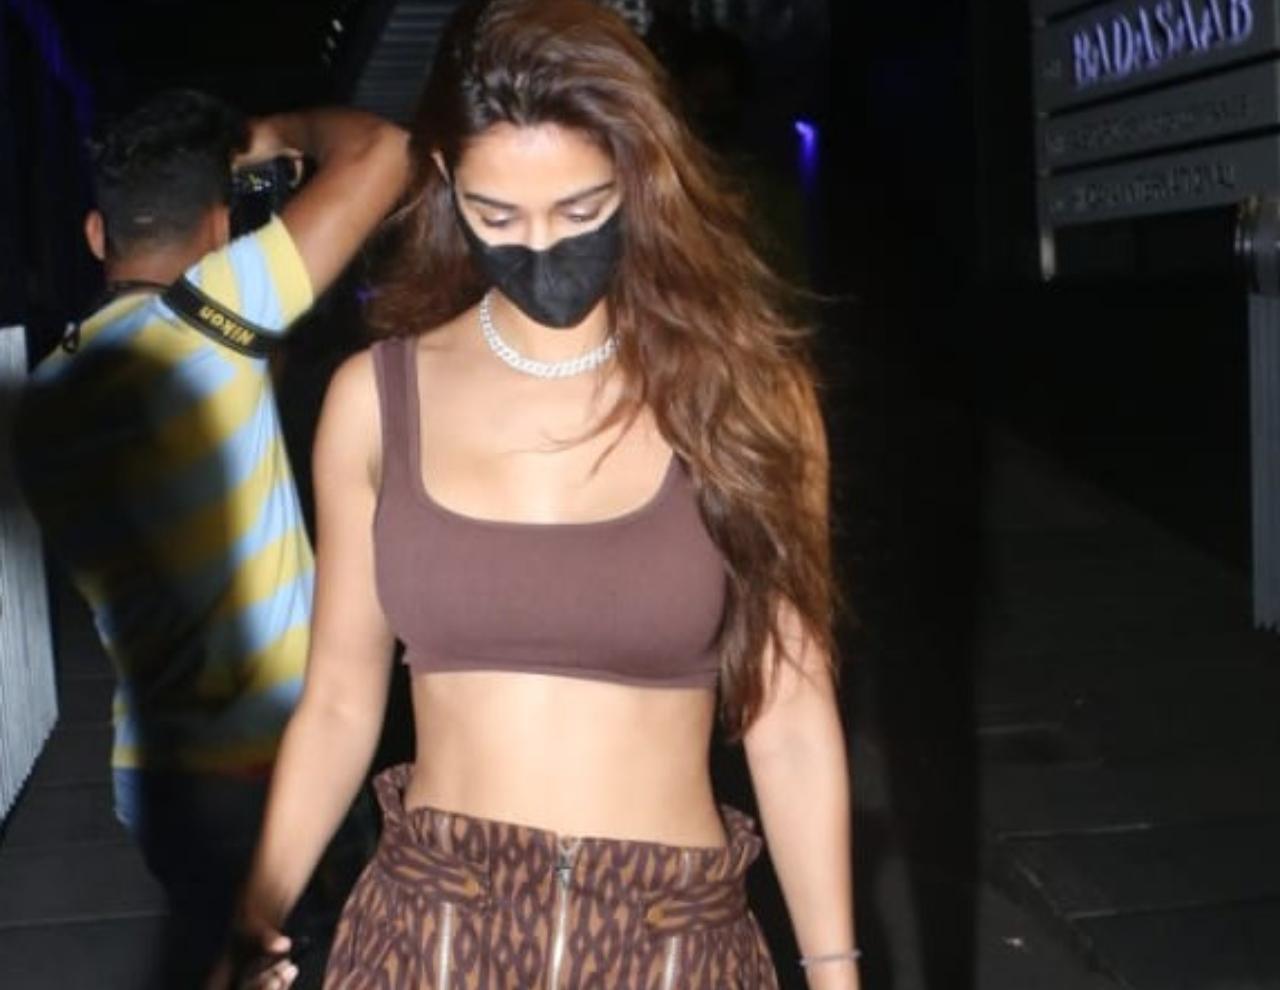 Disha Patani looked chic in her brown tube top and trousers as she was snapped at a popular restaurant in Bandra. The actress wore a black protective mask to prevent the spread of COVID-19.